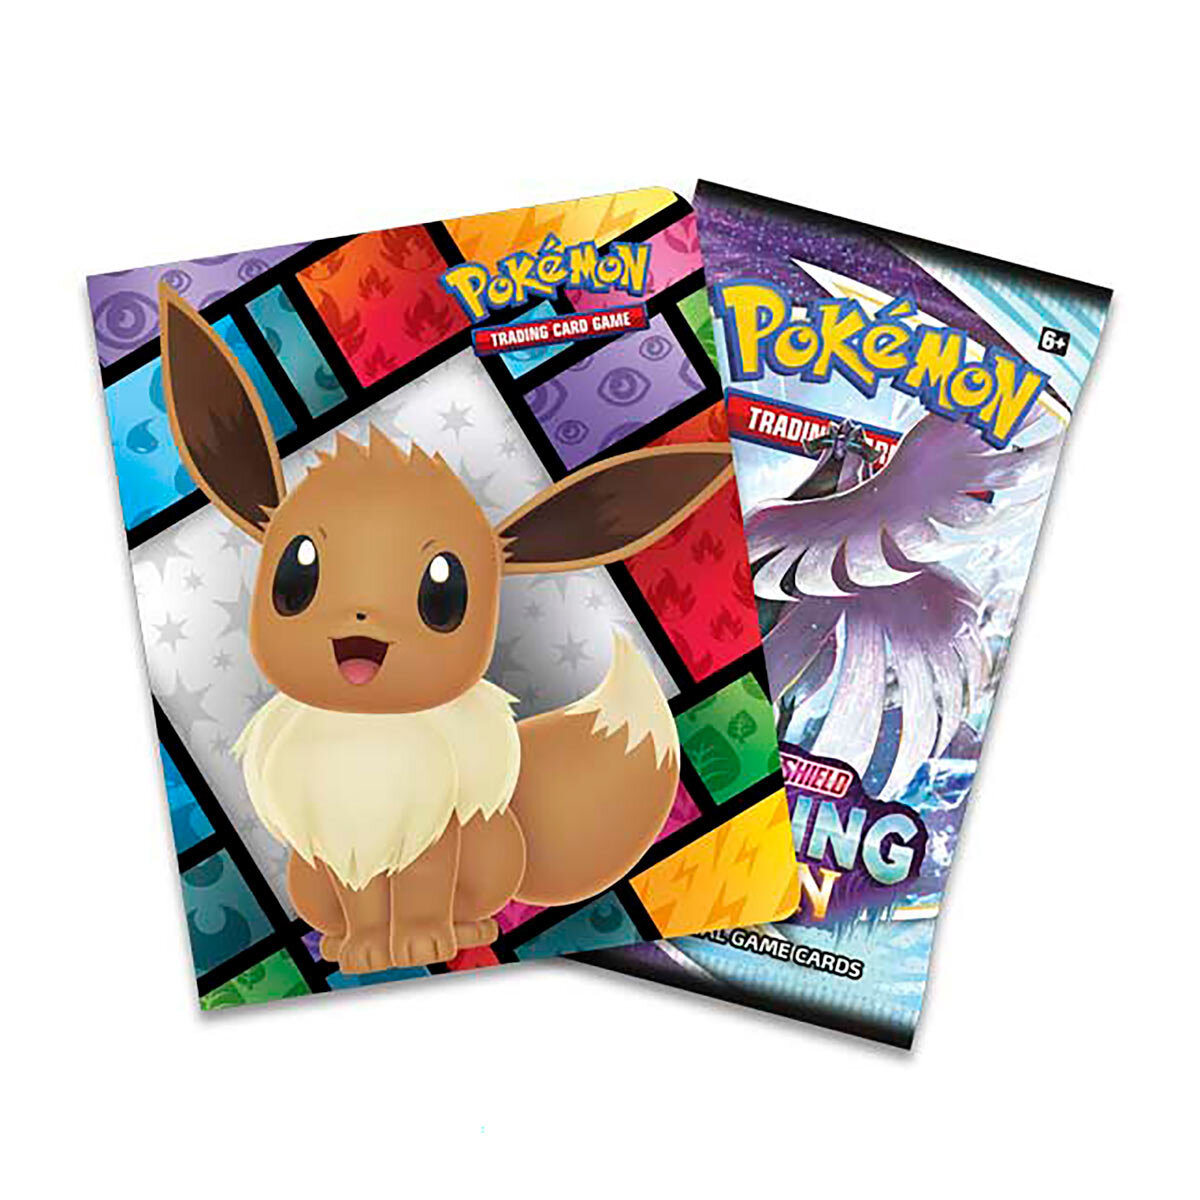 Buy Pokemon Collectors Chest & 2 Pokeballs Included4 Image at Costco.co.uk